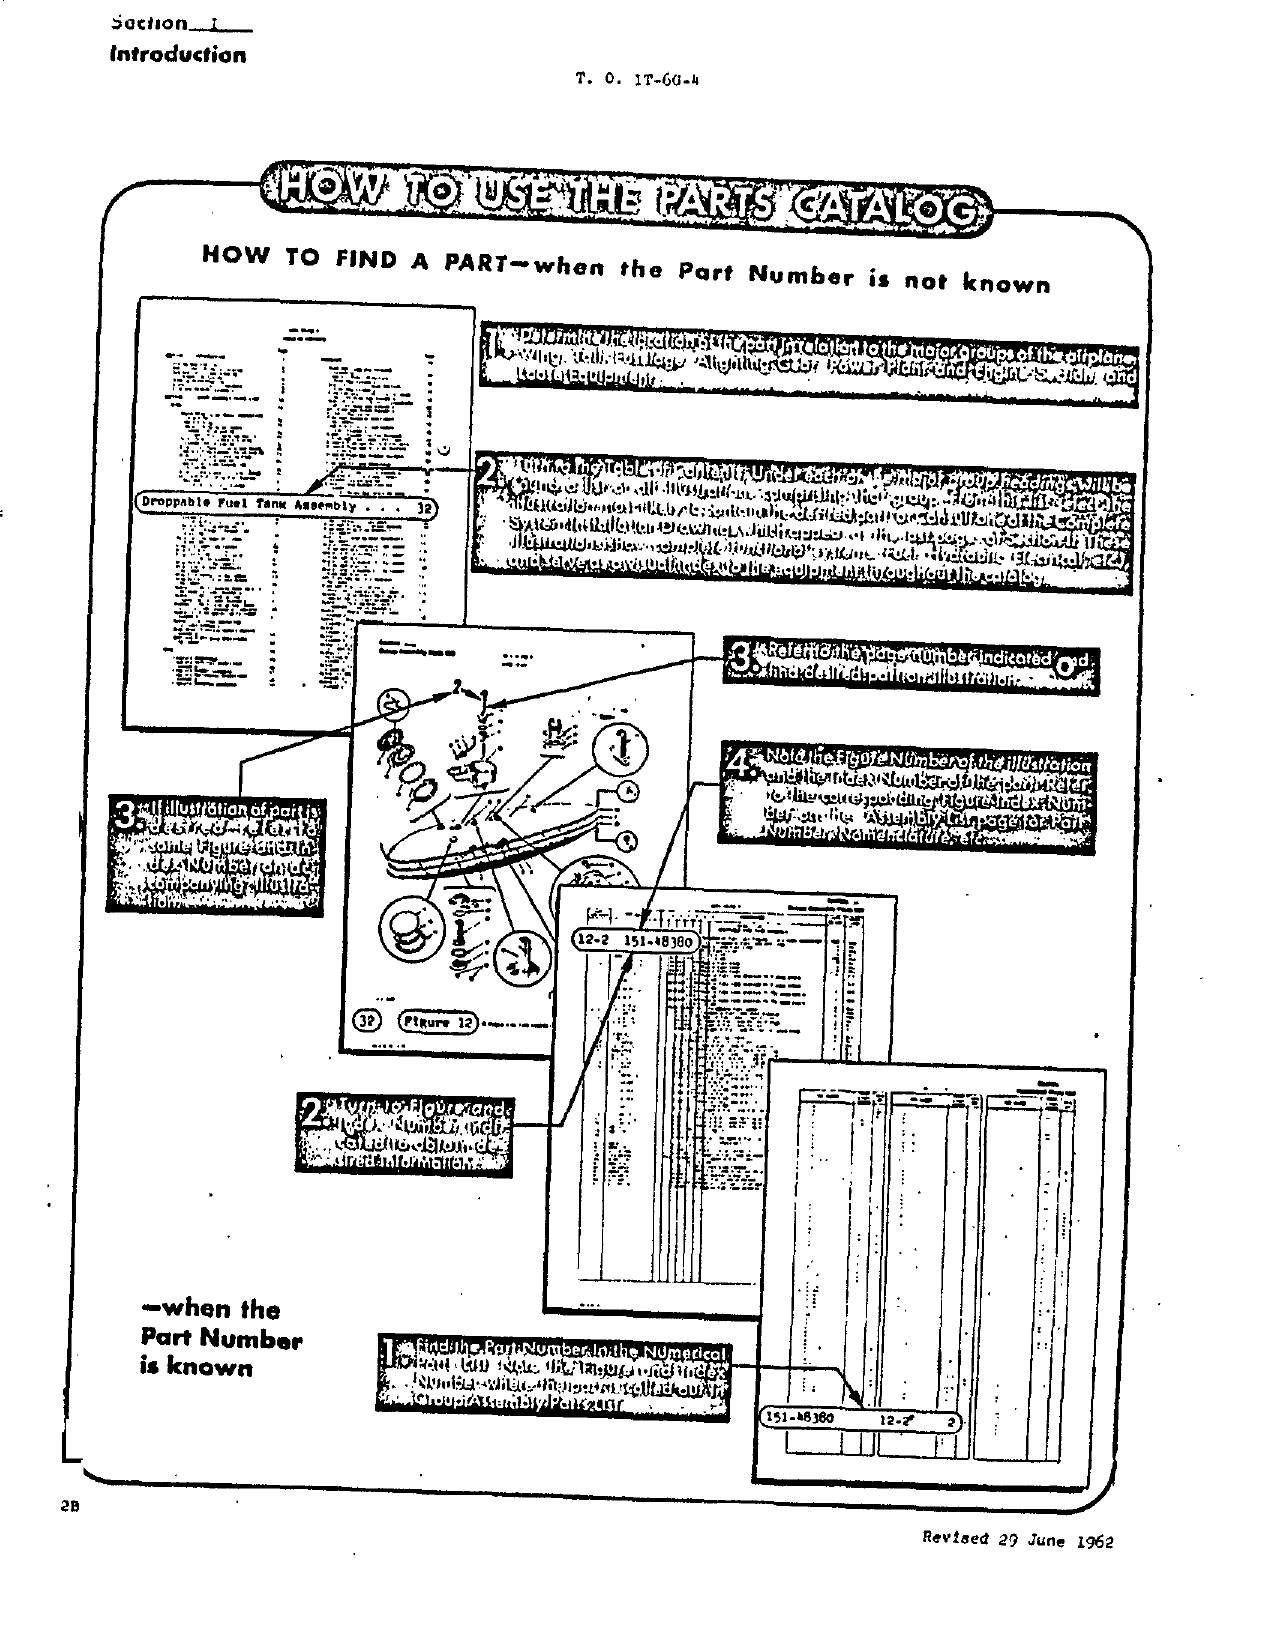 Sample page 7 from AirCorps Library document: Parts Catalog for T-6G and LT-6G